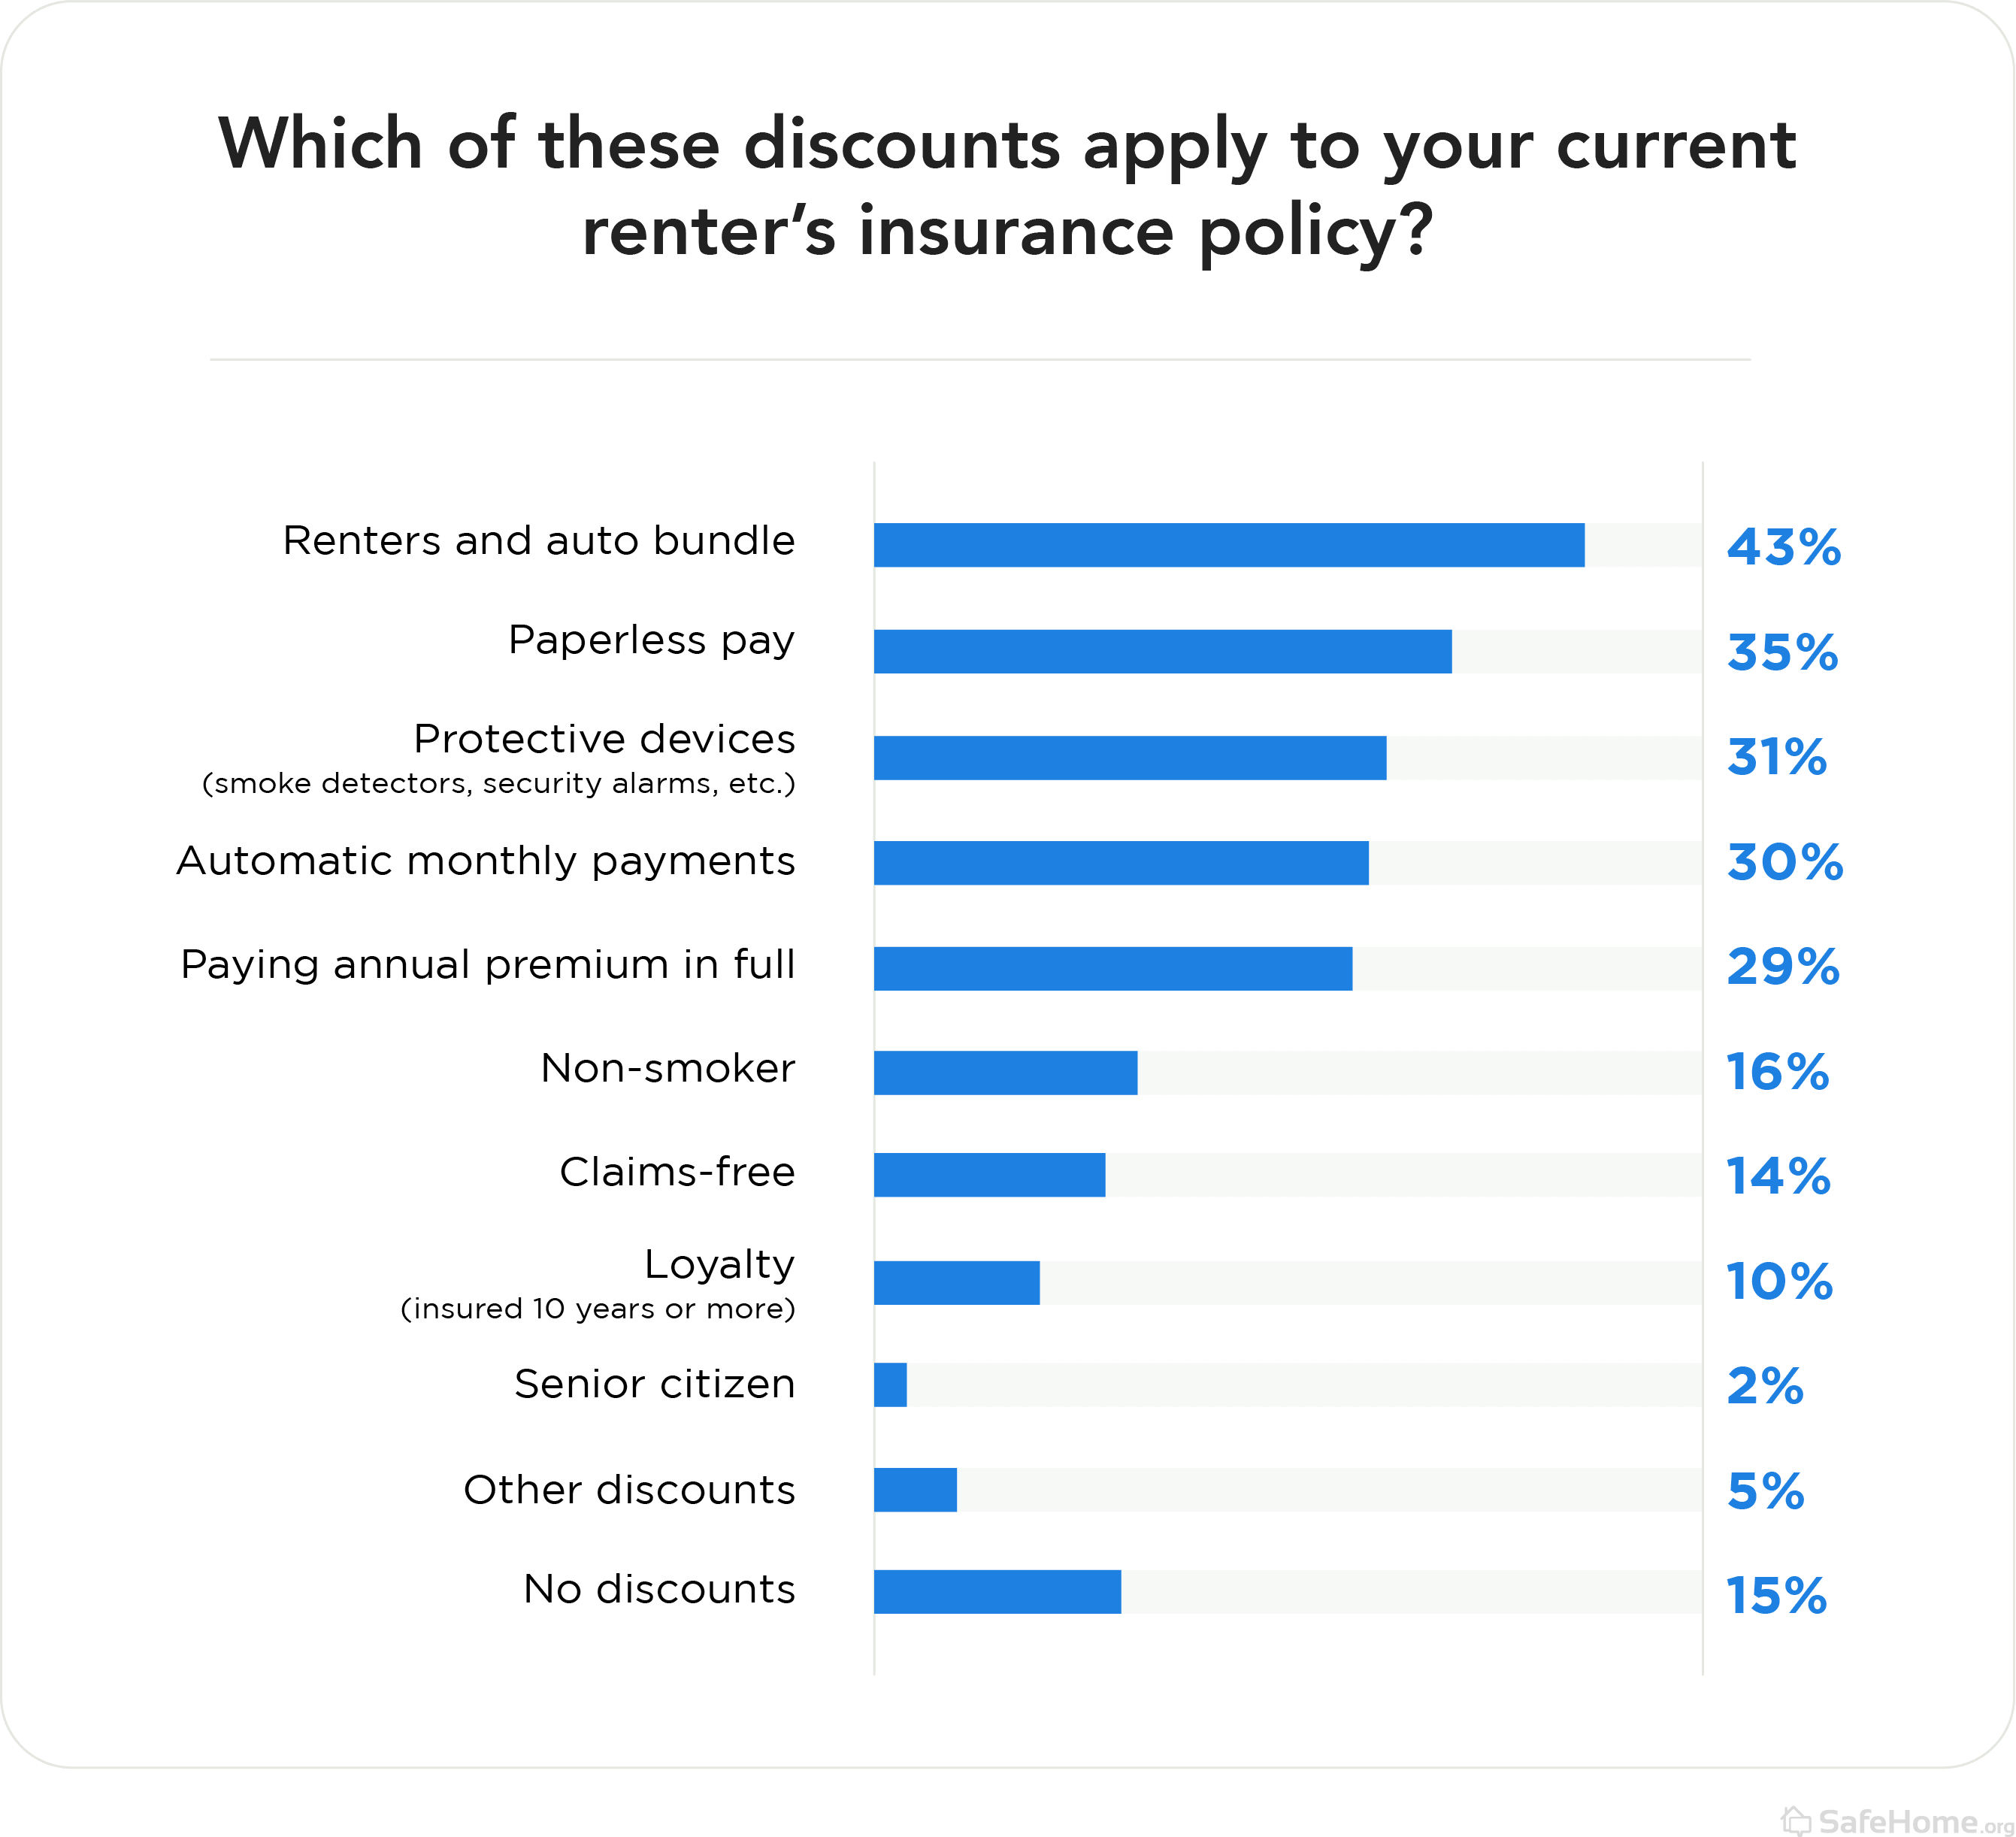 Which of these discounts apply to your current renters insurance policy